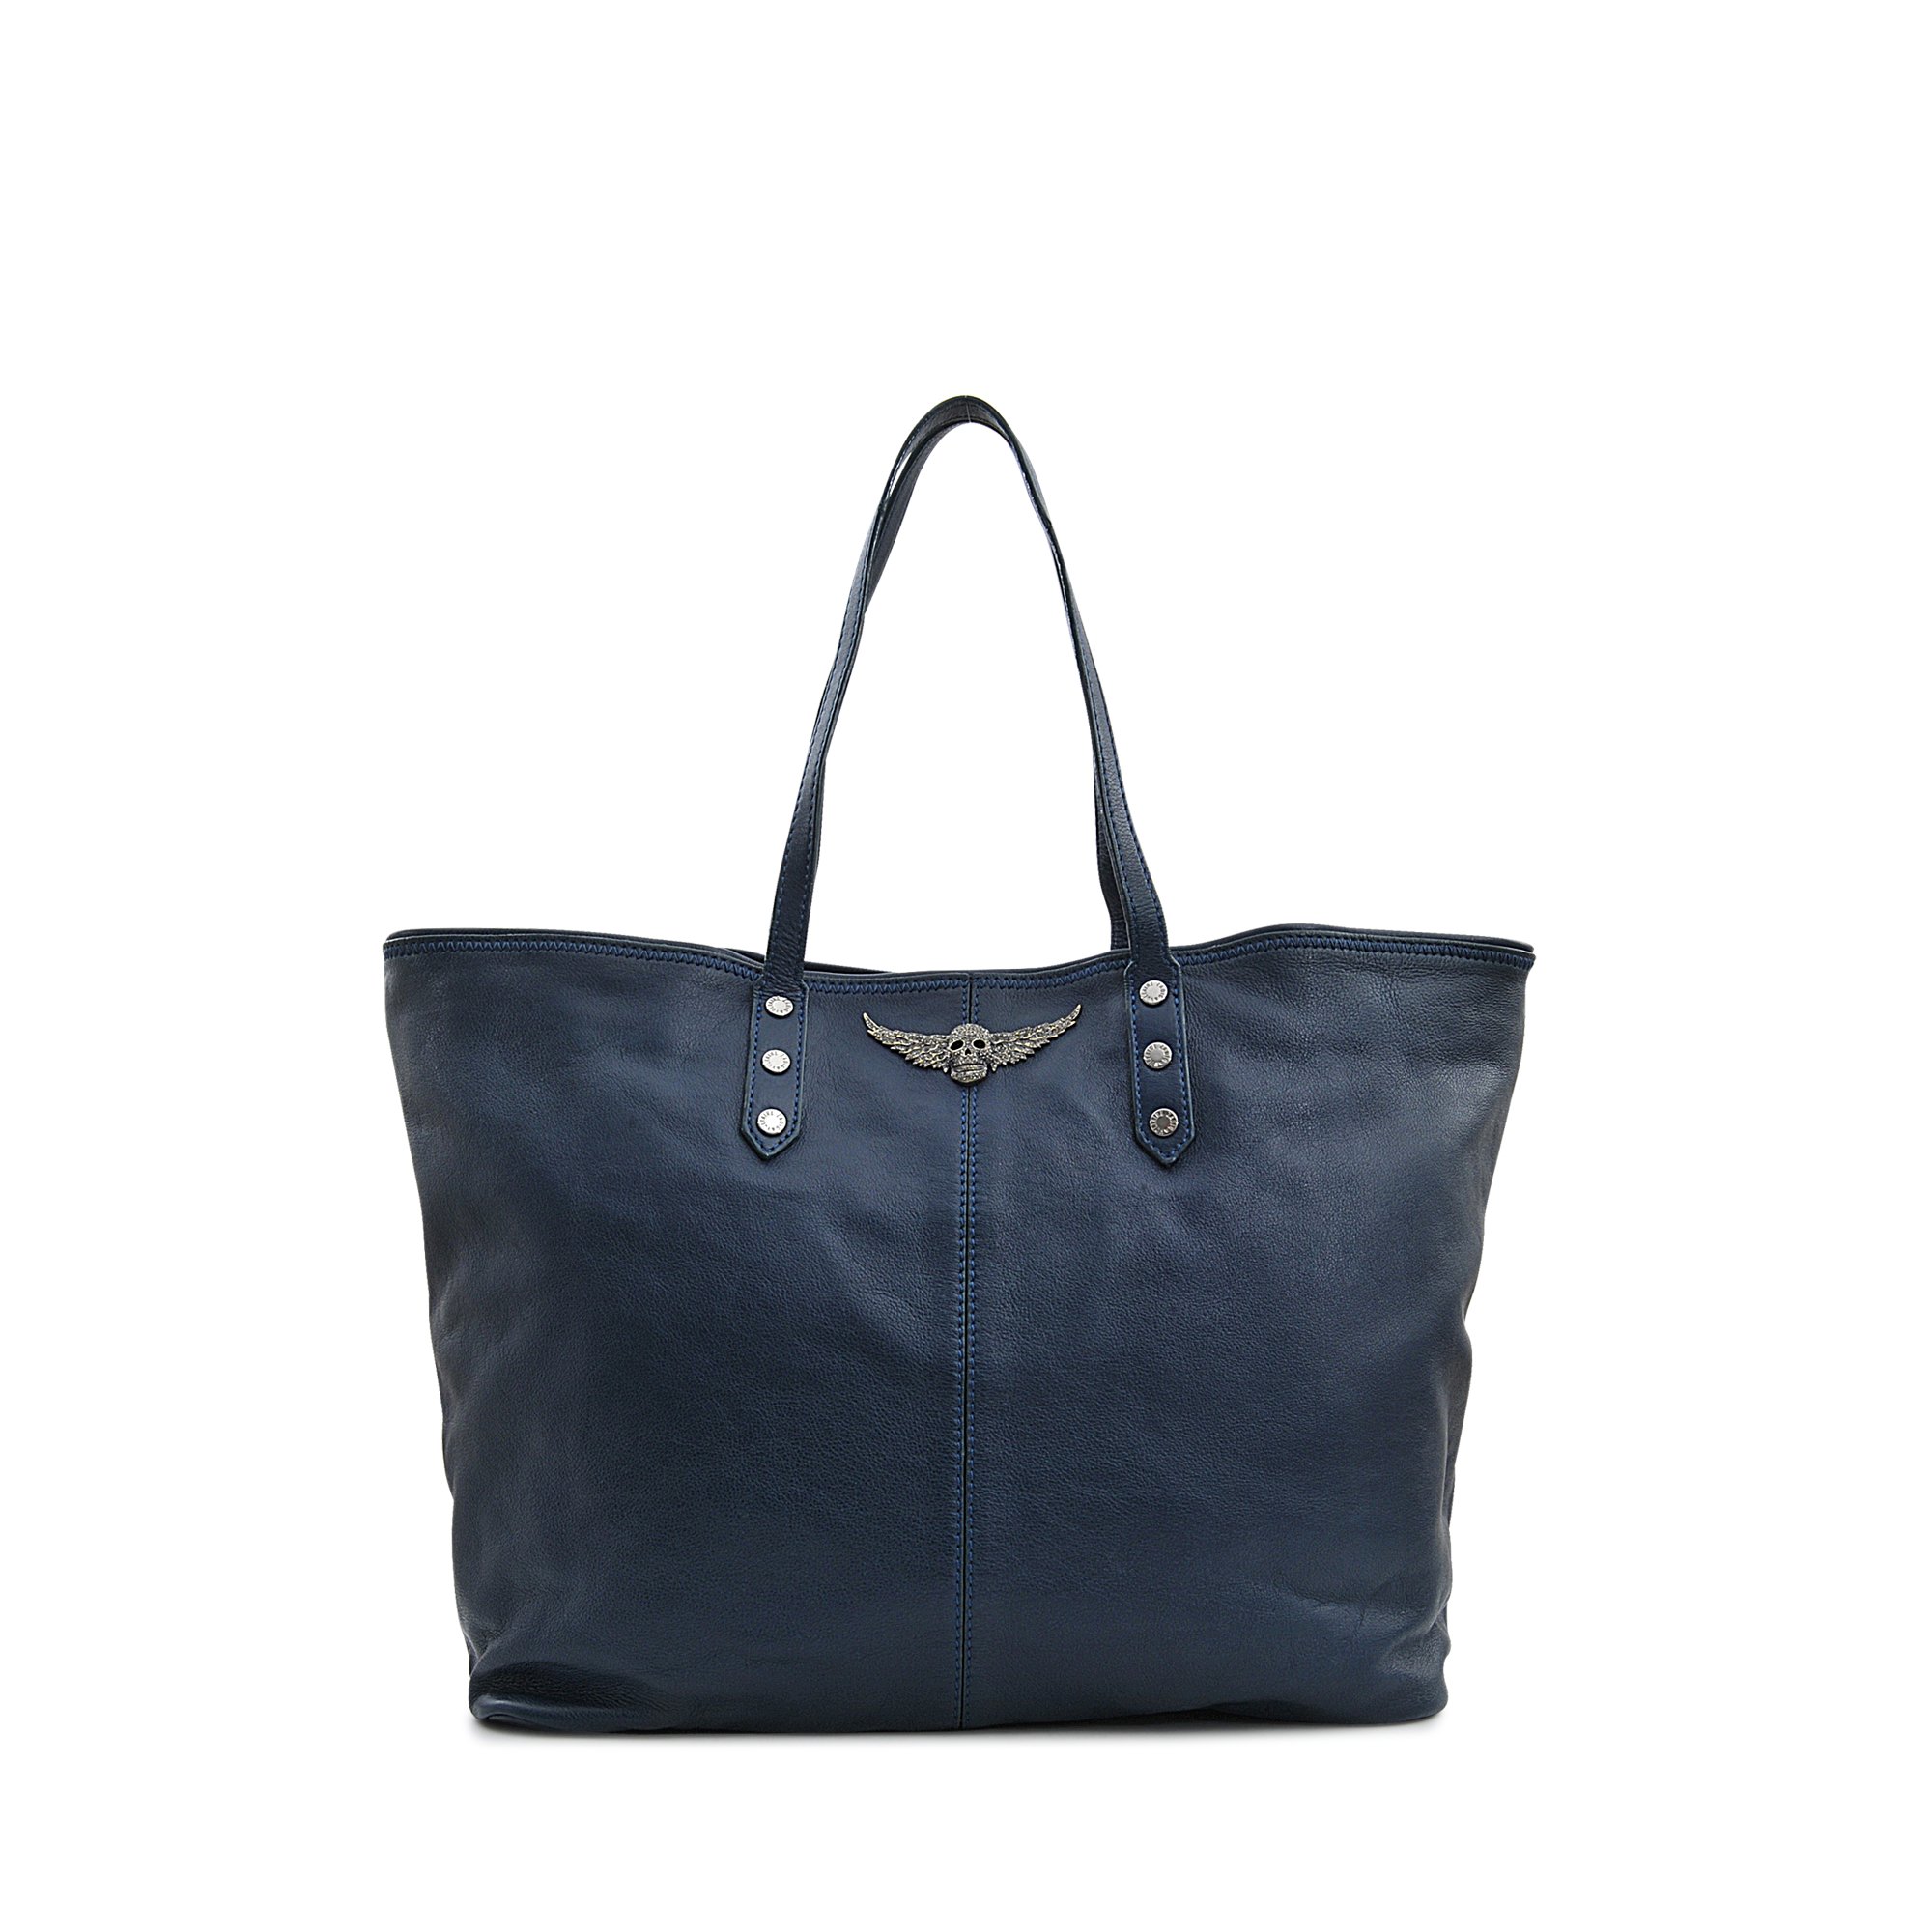 Zadig & Voltaire Mick Tote in Blue | Lyst